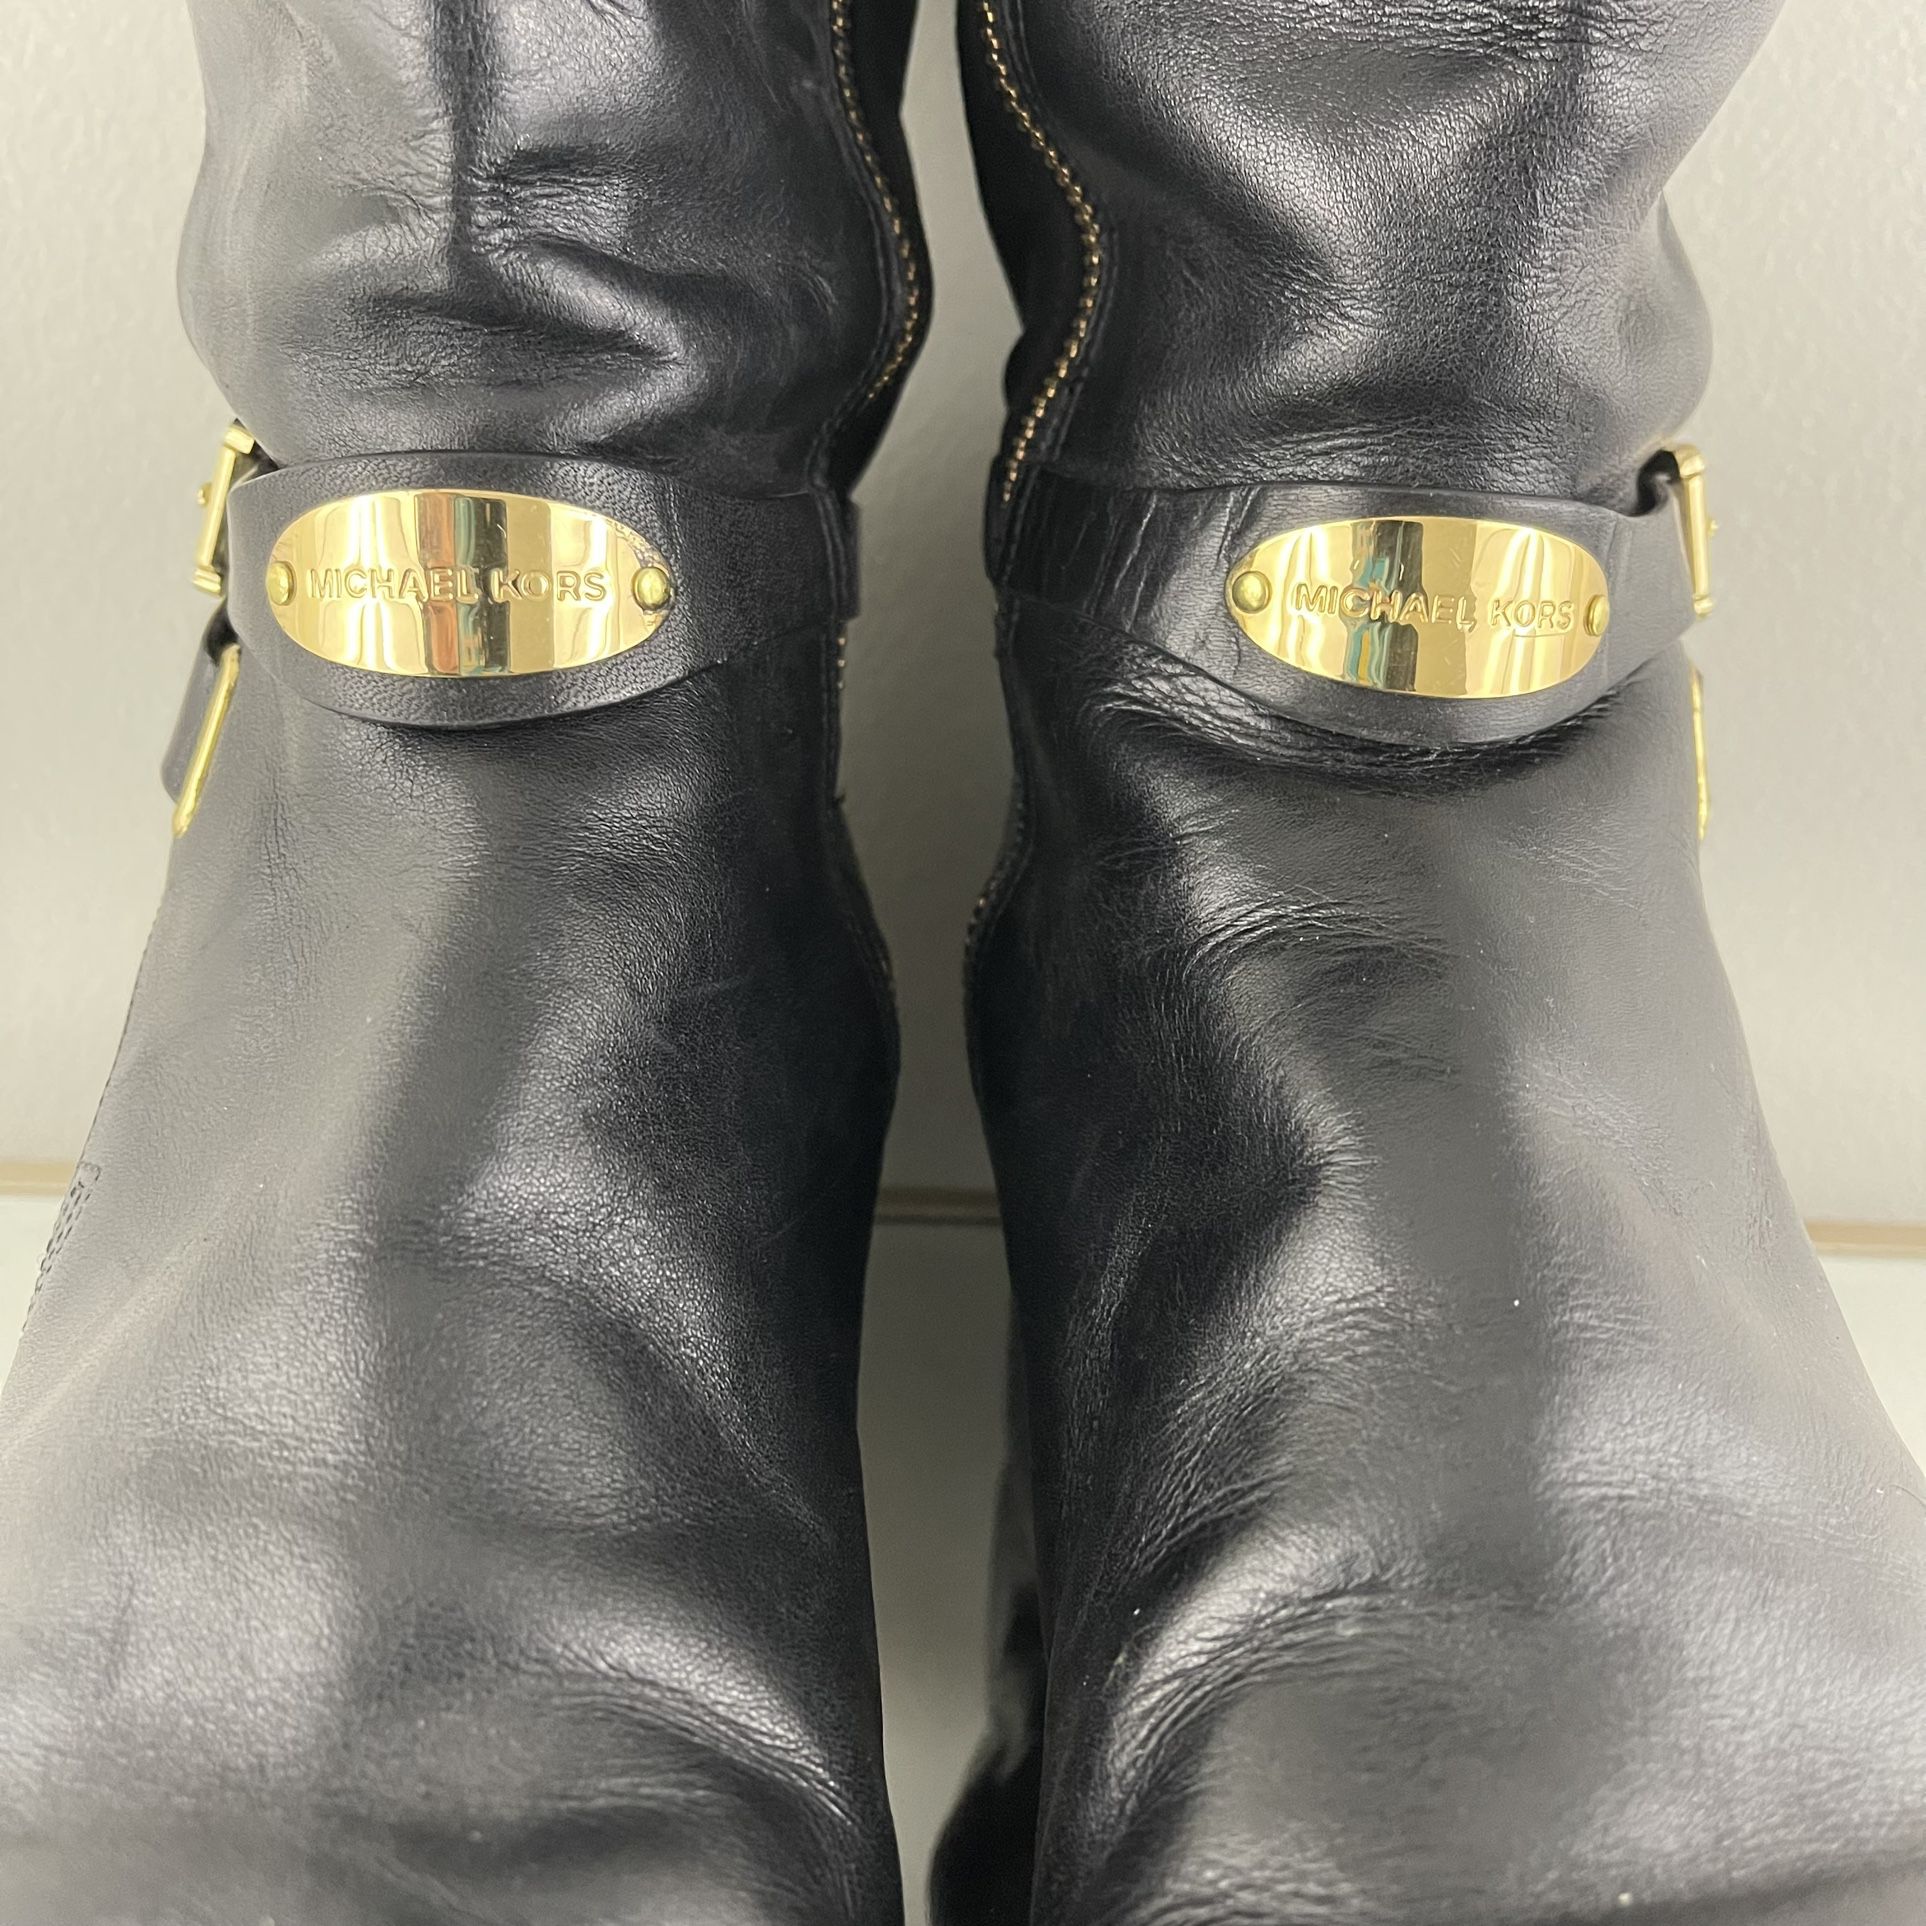 MICHAEL KORS Black Leather Gold Hardware Buckle Arley Knee High Riding Boots